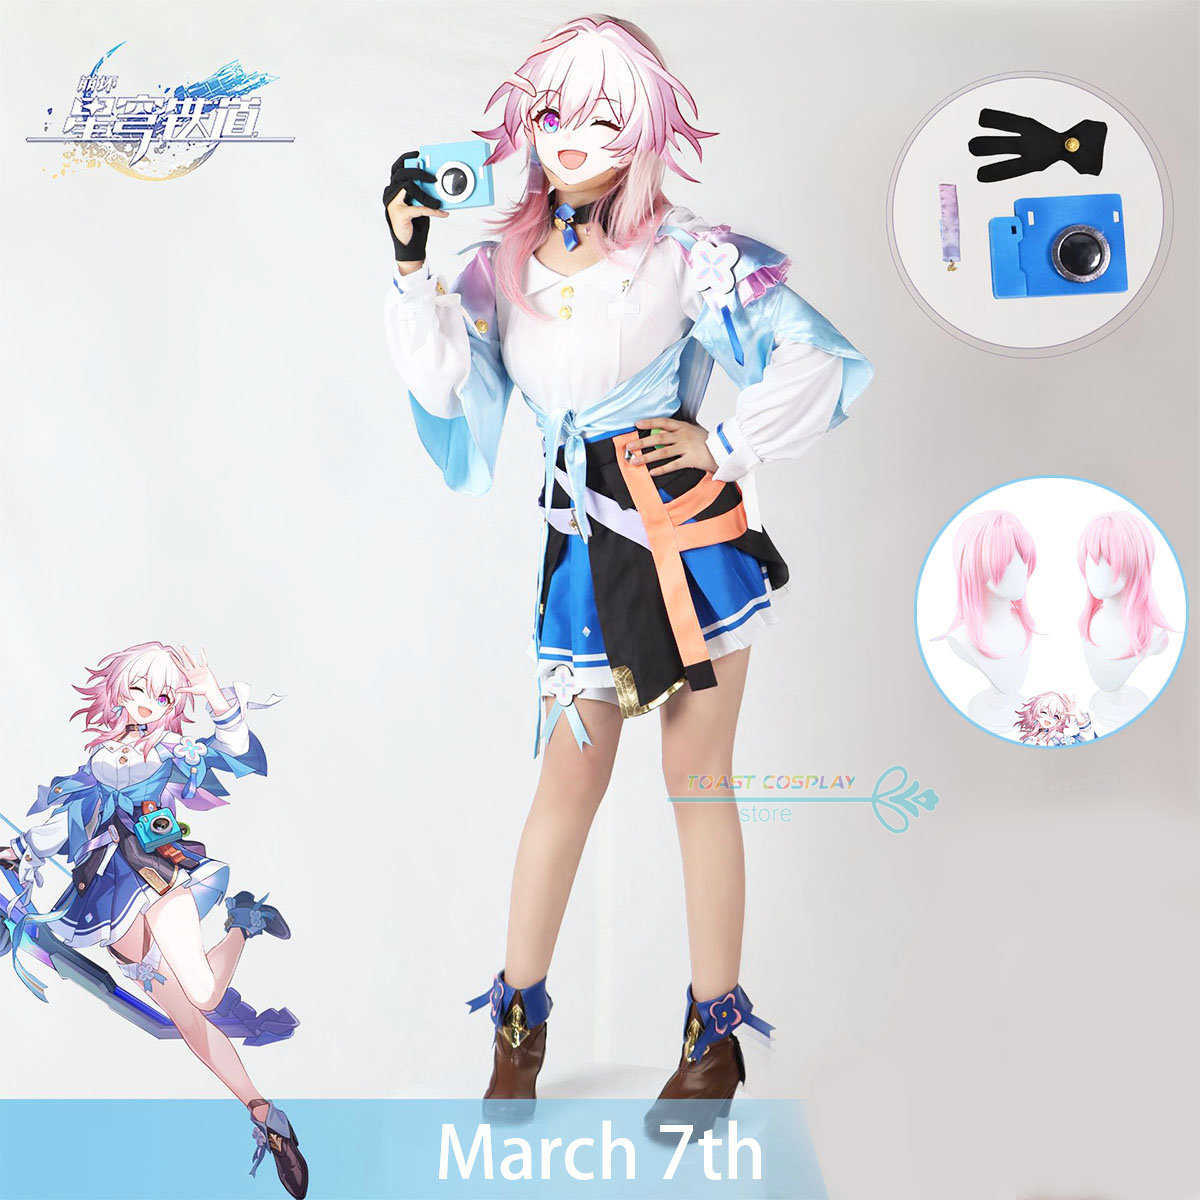 

Anime Costumes Game Honkai Star Rail 7th March Cosplay Come Elegant Uniform Outfit for Women Pink Wig Anime Cosplay Sexy Dress Z0602